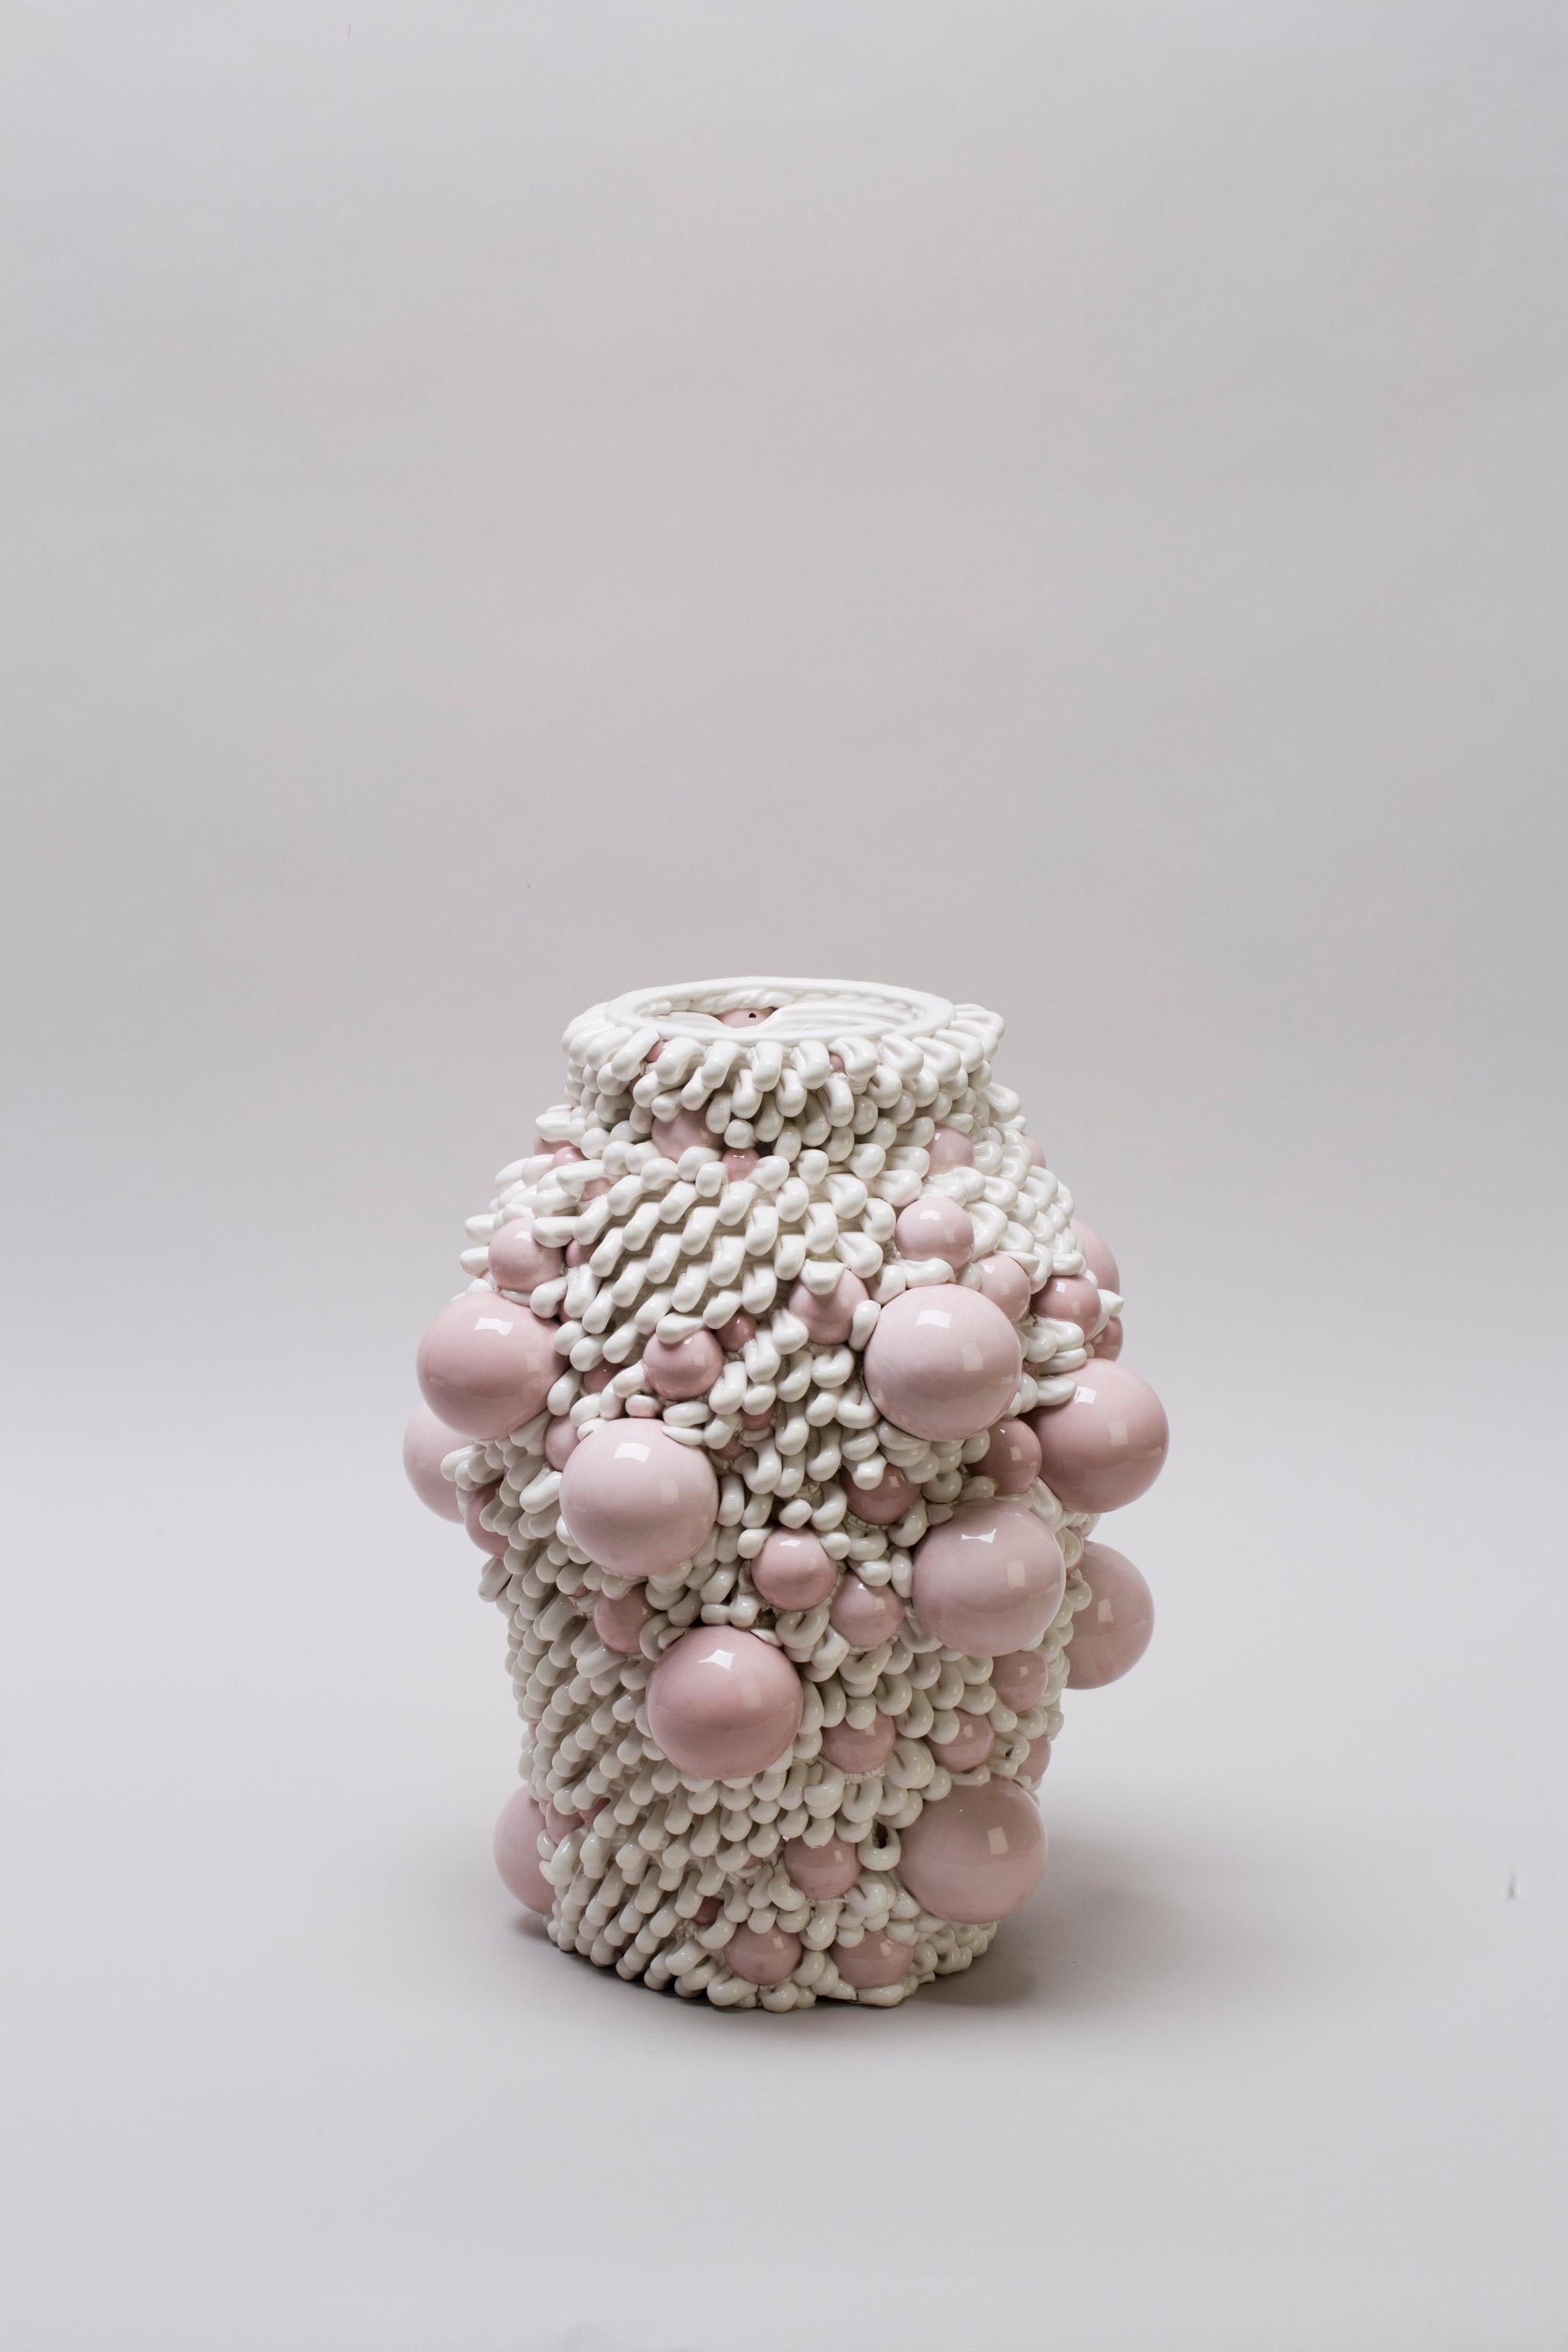 Italian White 3D Printed Ceramic Sculptural Vase Italy Contemporary, 21st Century For Sale